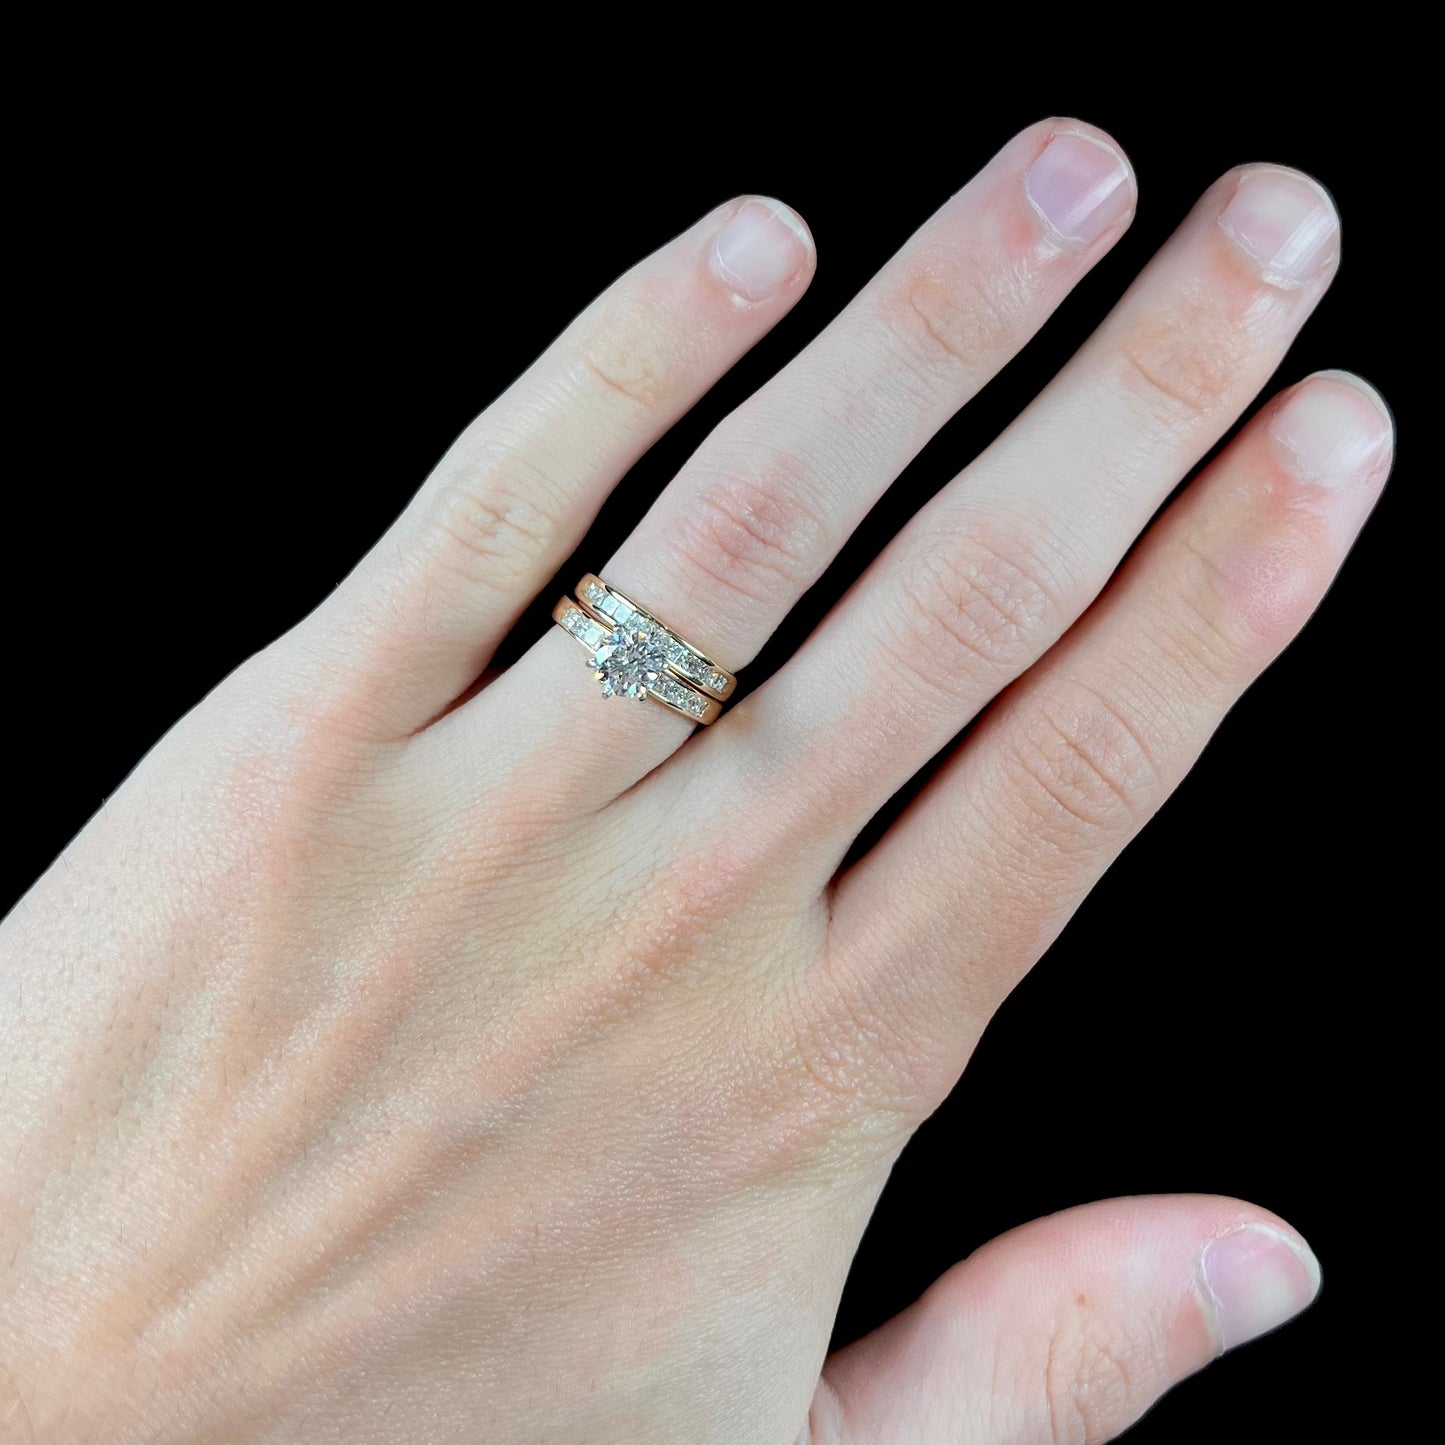 A diamond engagement and wedding ring set.  The center stone is a 1 carat round diamond, and the side stones are channel set princess cut diamonds.